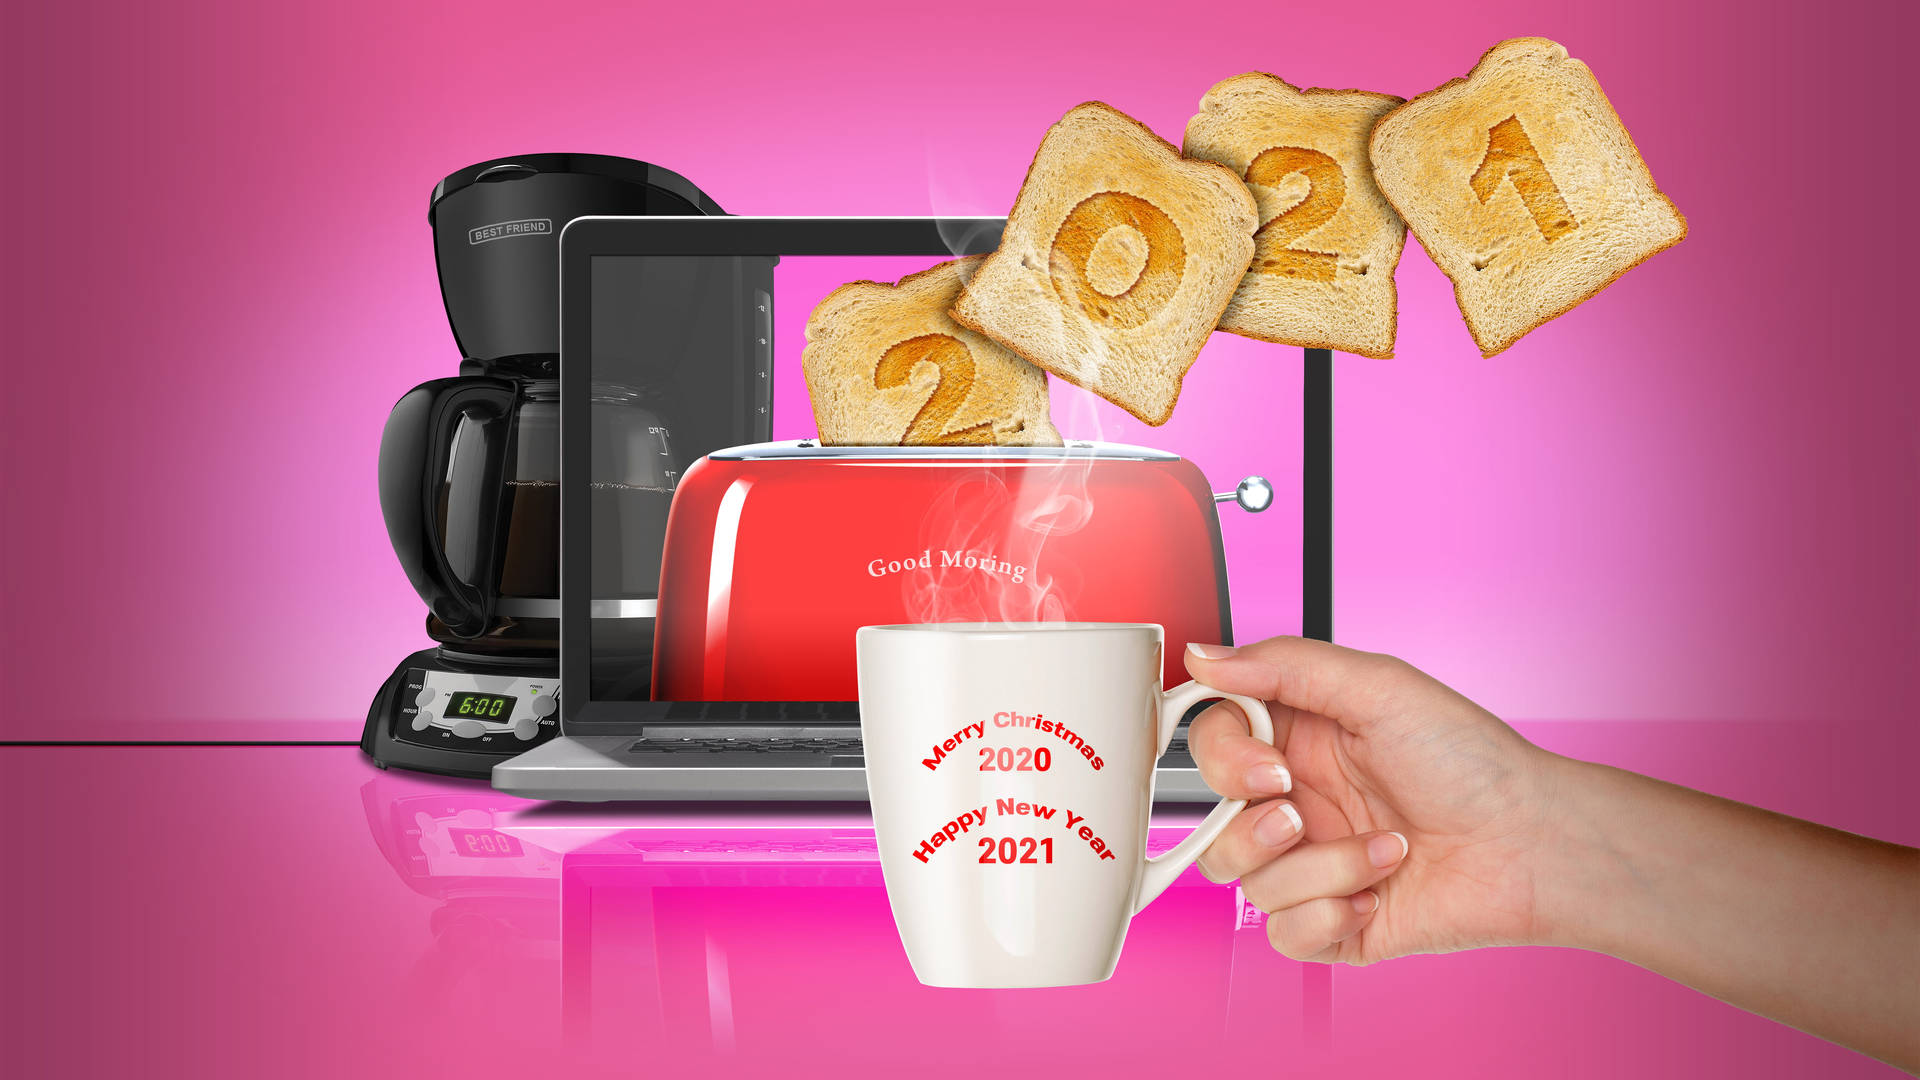 Toaster And Coffee 2021 Desktop Background